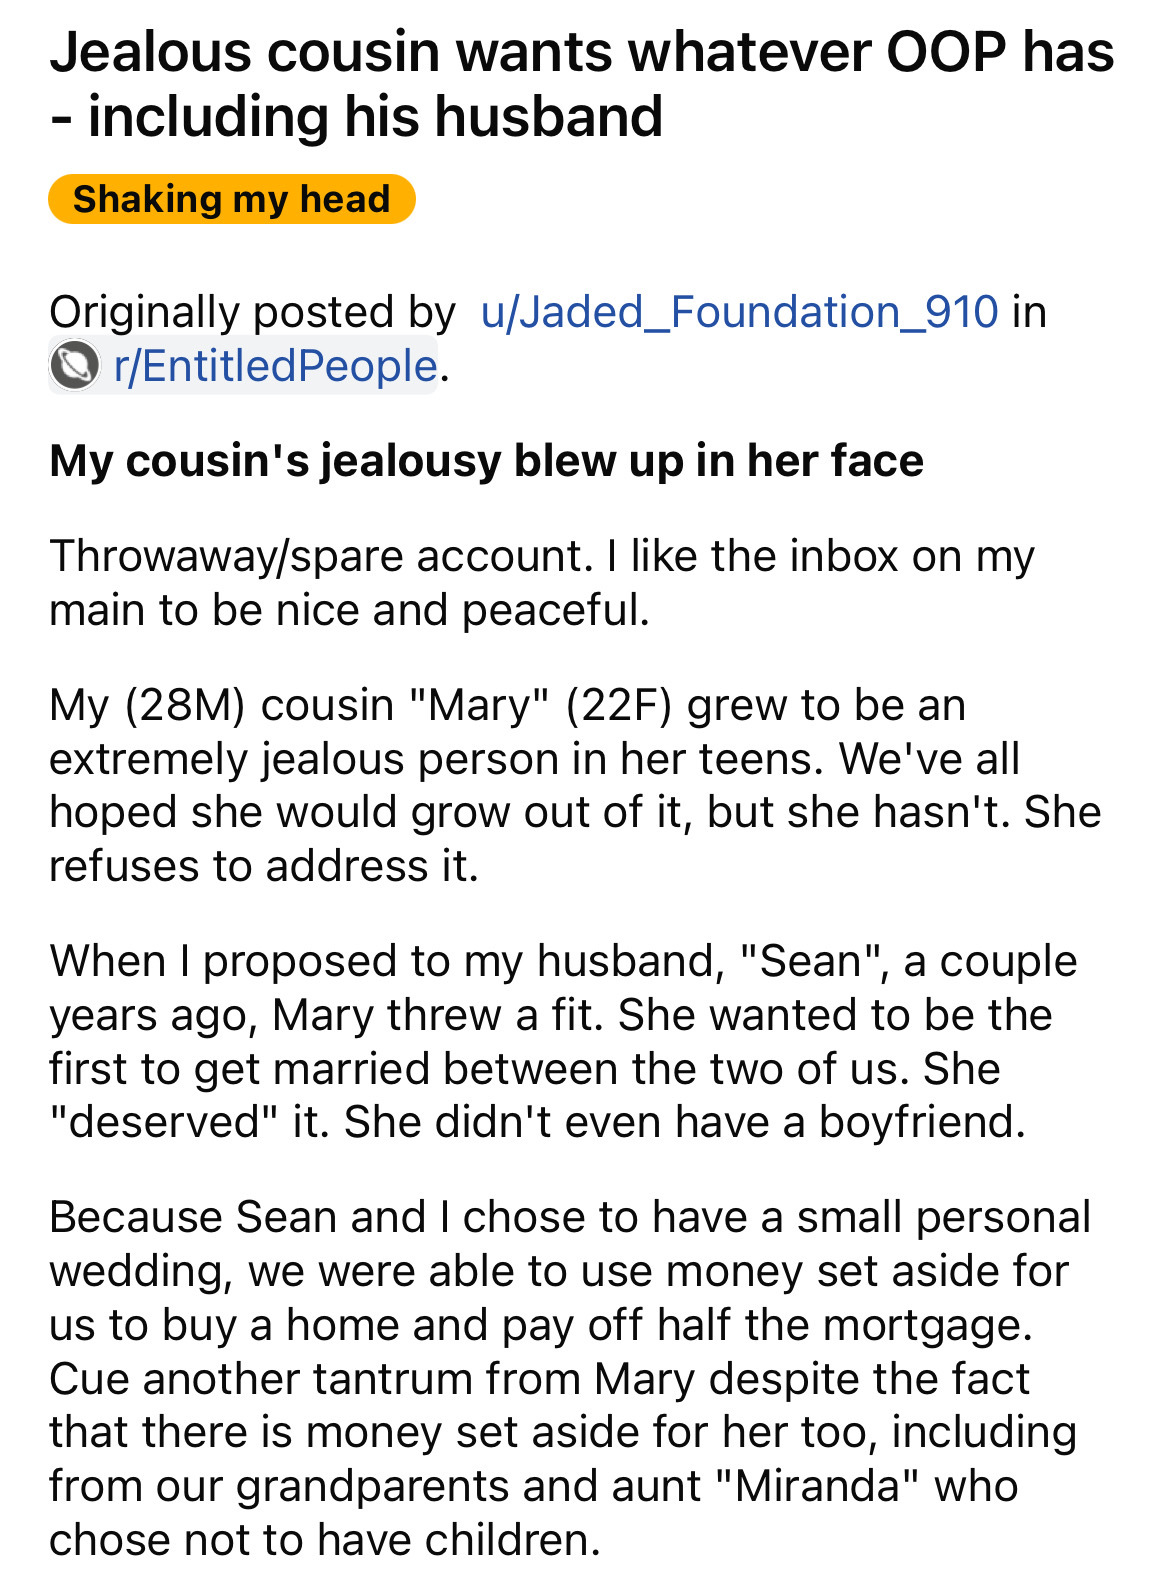 document - Jealous cousin wants whatever Oop has including his husband Shaking my head Originally posted by uJaded_Foundation_910 in rEntitled People. My cousin's jealousy blew up in her face Throwawayspare account. I the inbox on my main to be nice and p